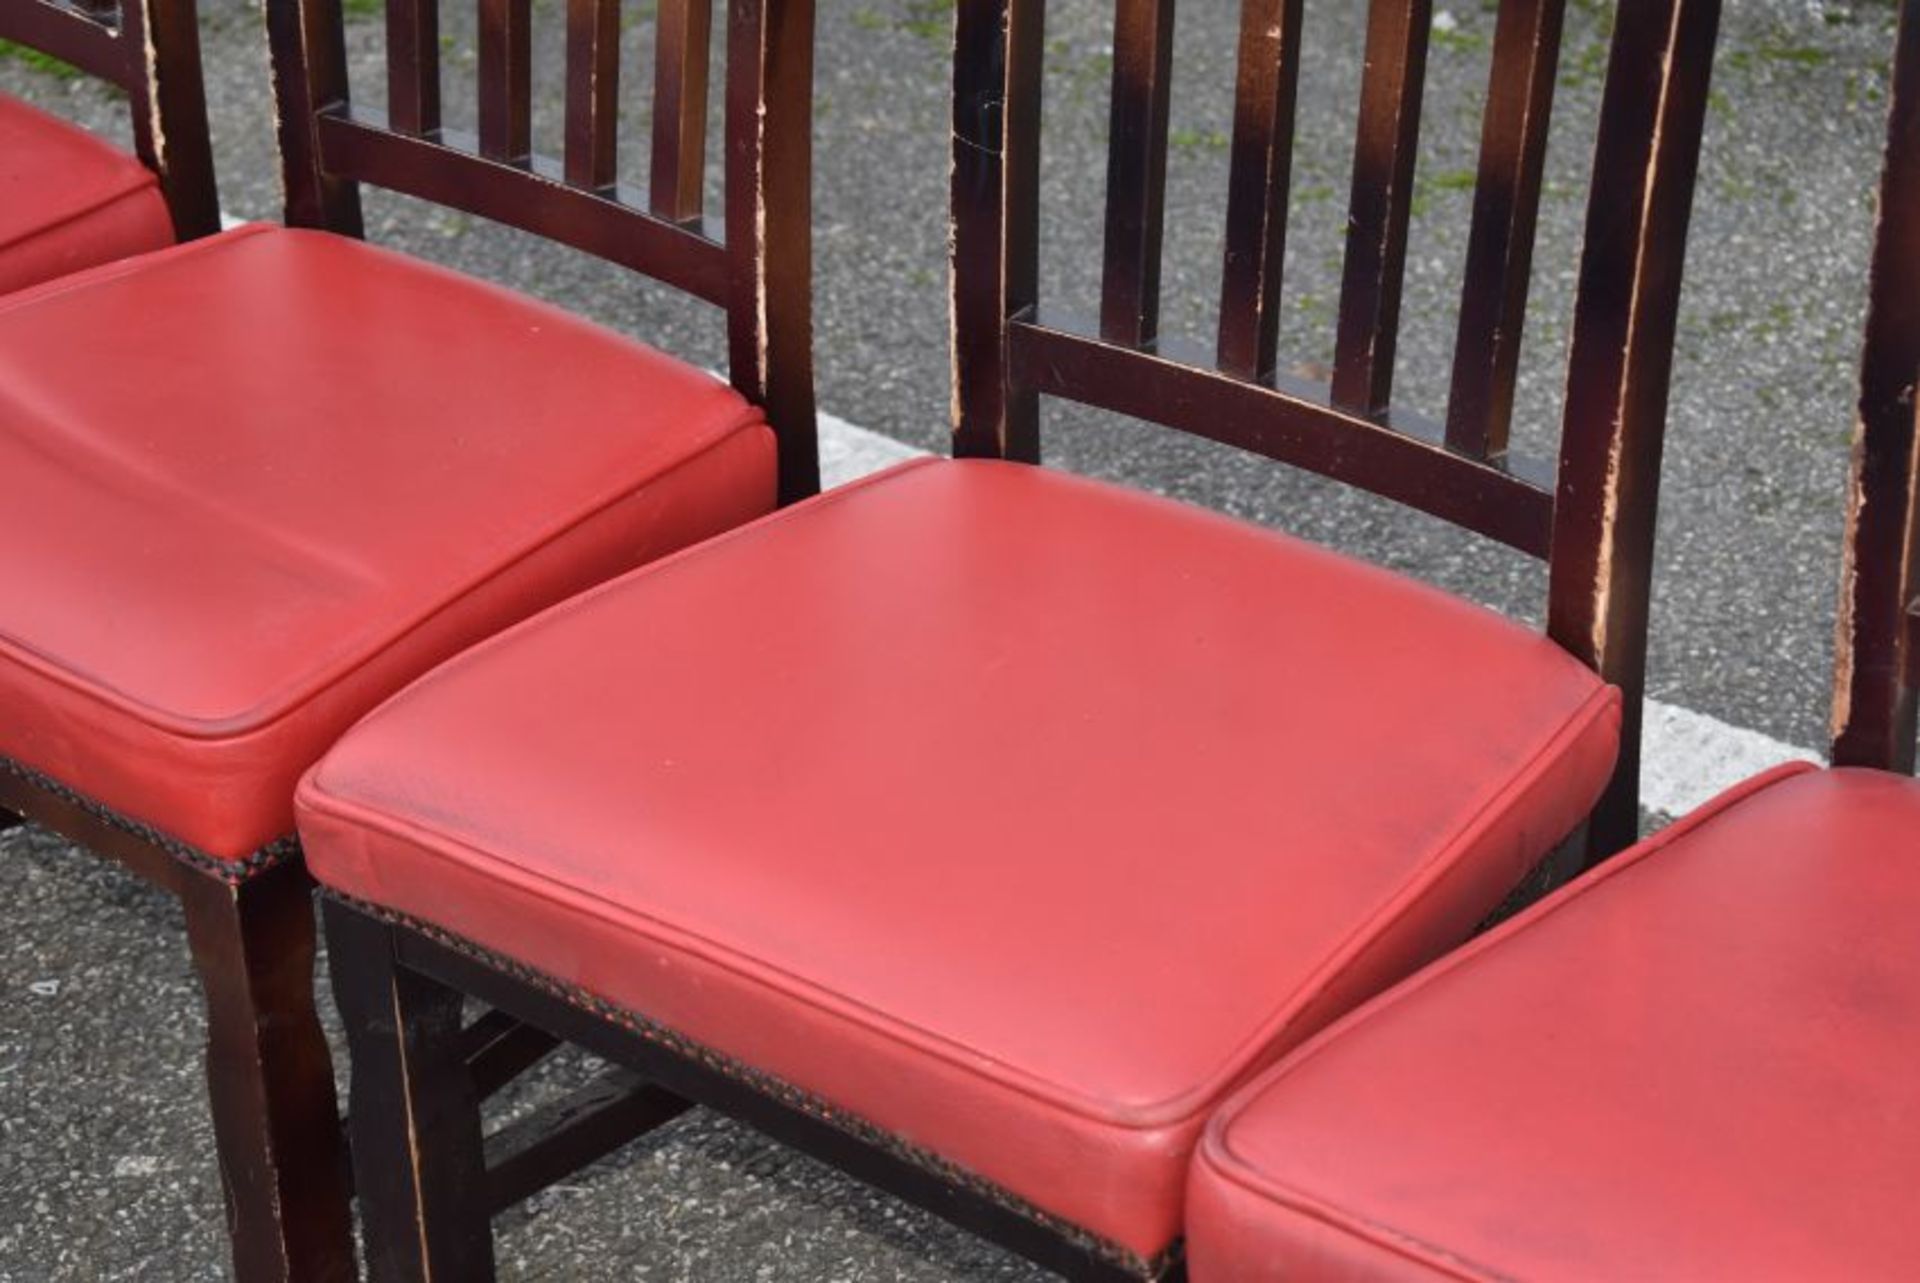 16 x Restaurant Dining Chairs With Dark Stained Wood Finish and Red Leather Seat Pads - Image 3 of 6